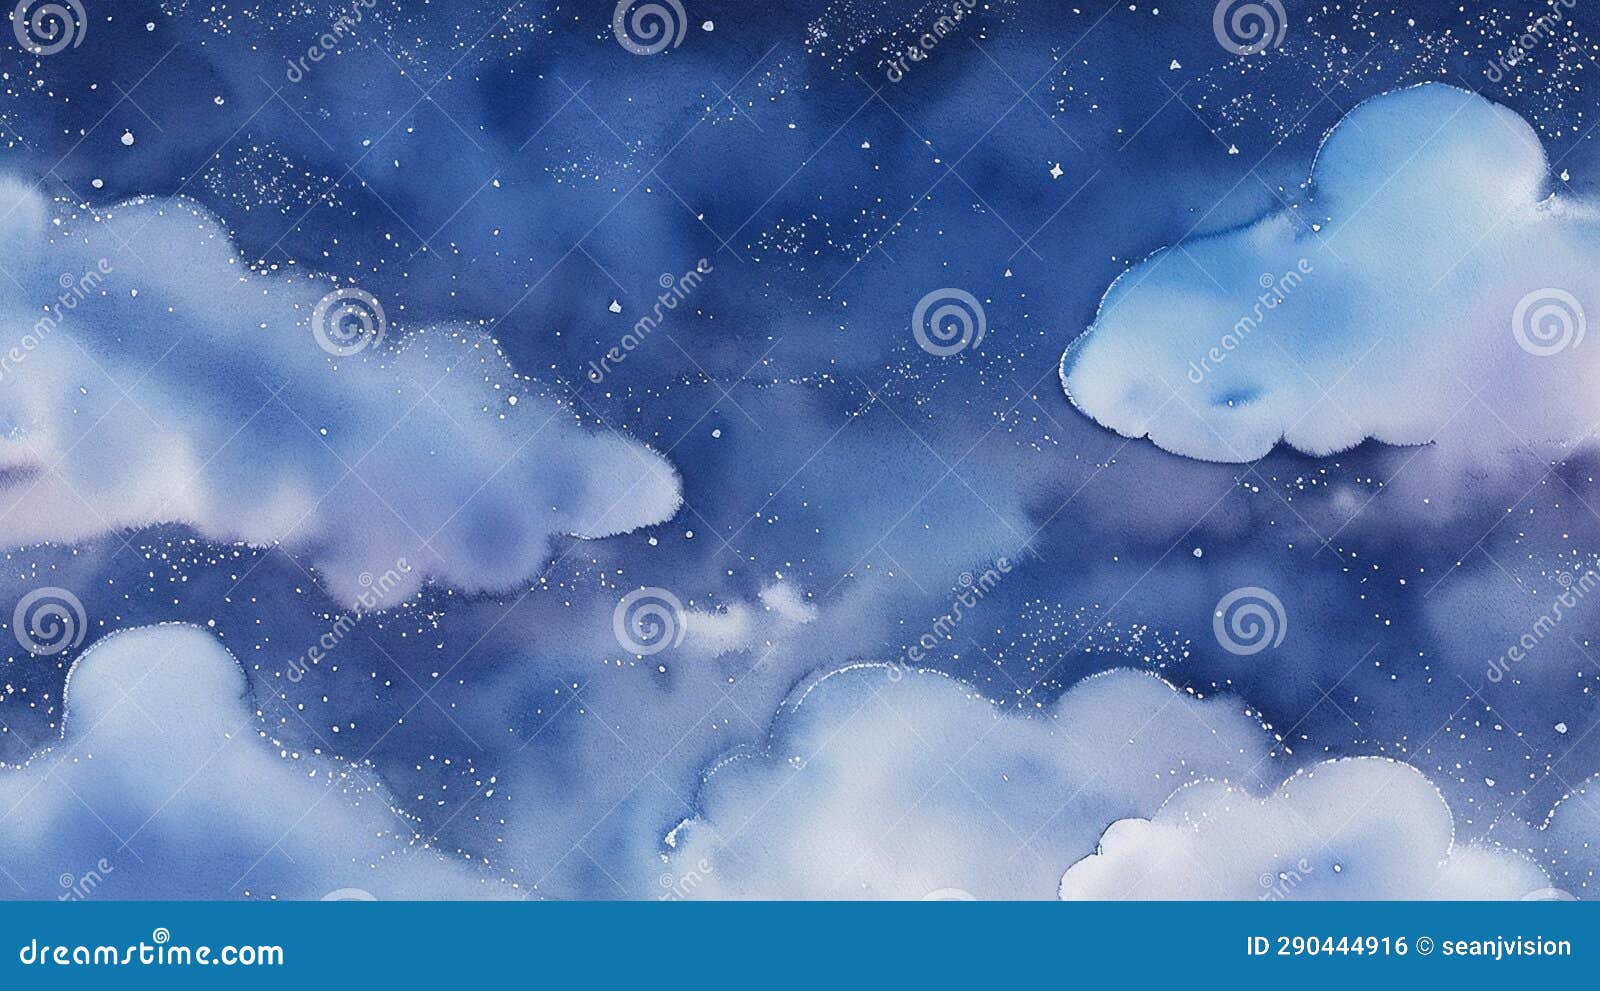 Blue Gradient Watercolor Illustration of a Night Sky with Clouds and ...